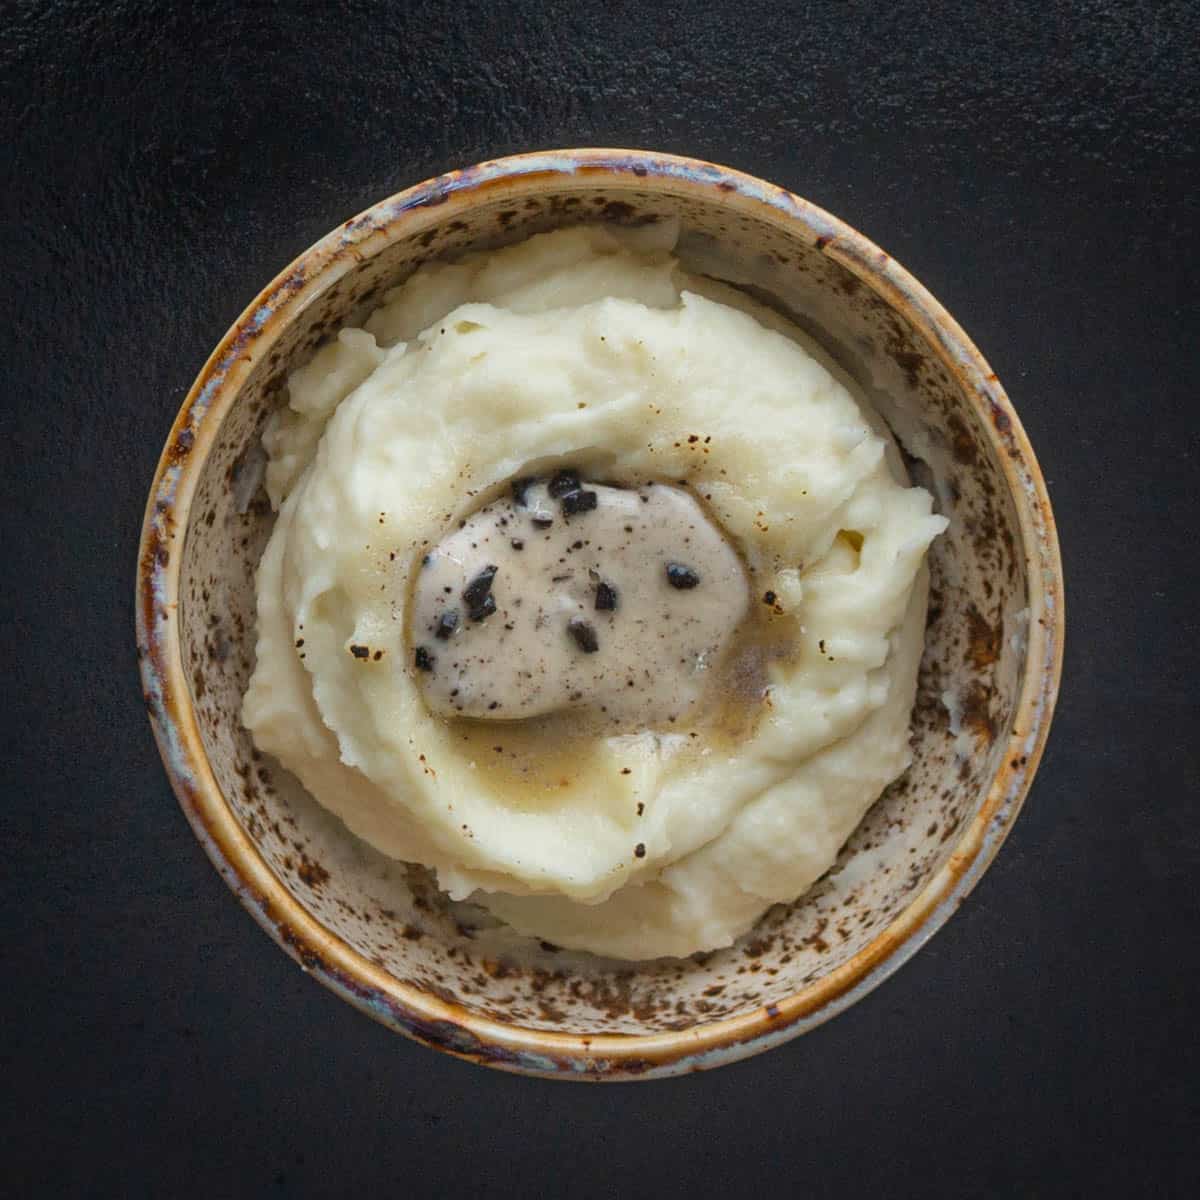 mashed potatoes in a ceramic bowl with a slice of truffle butter melting on top.